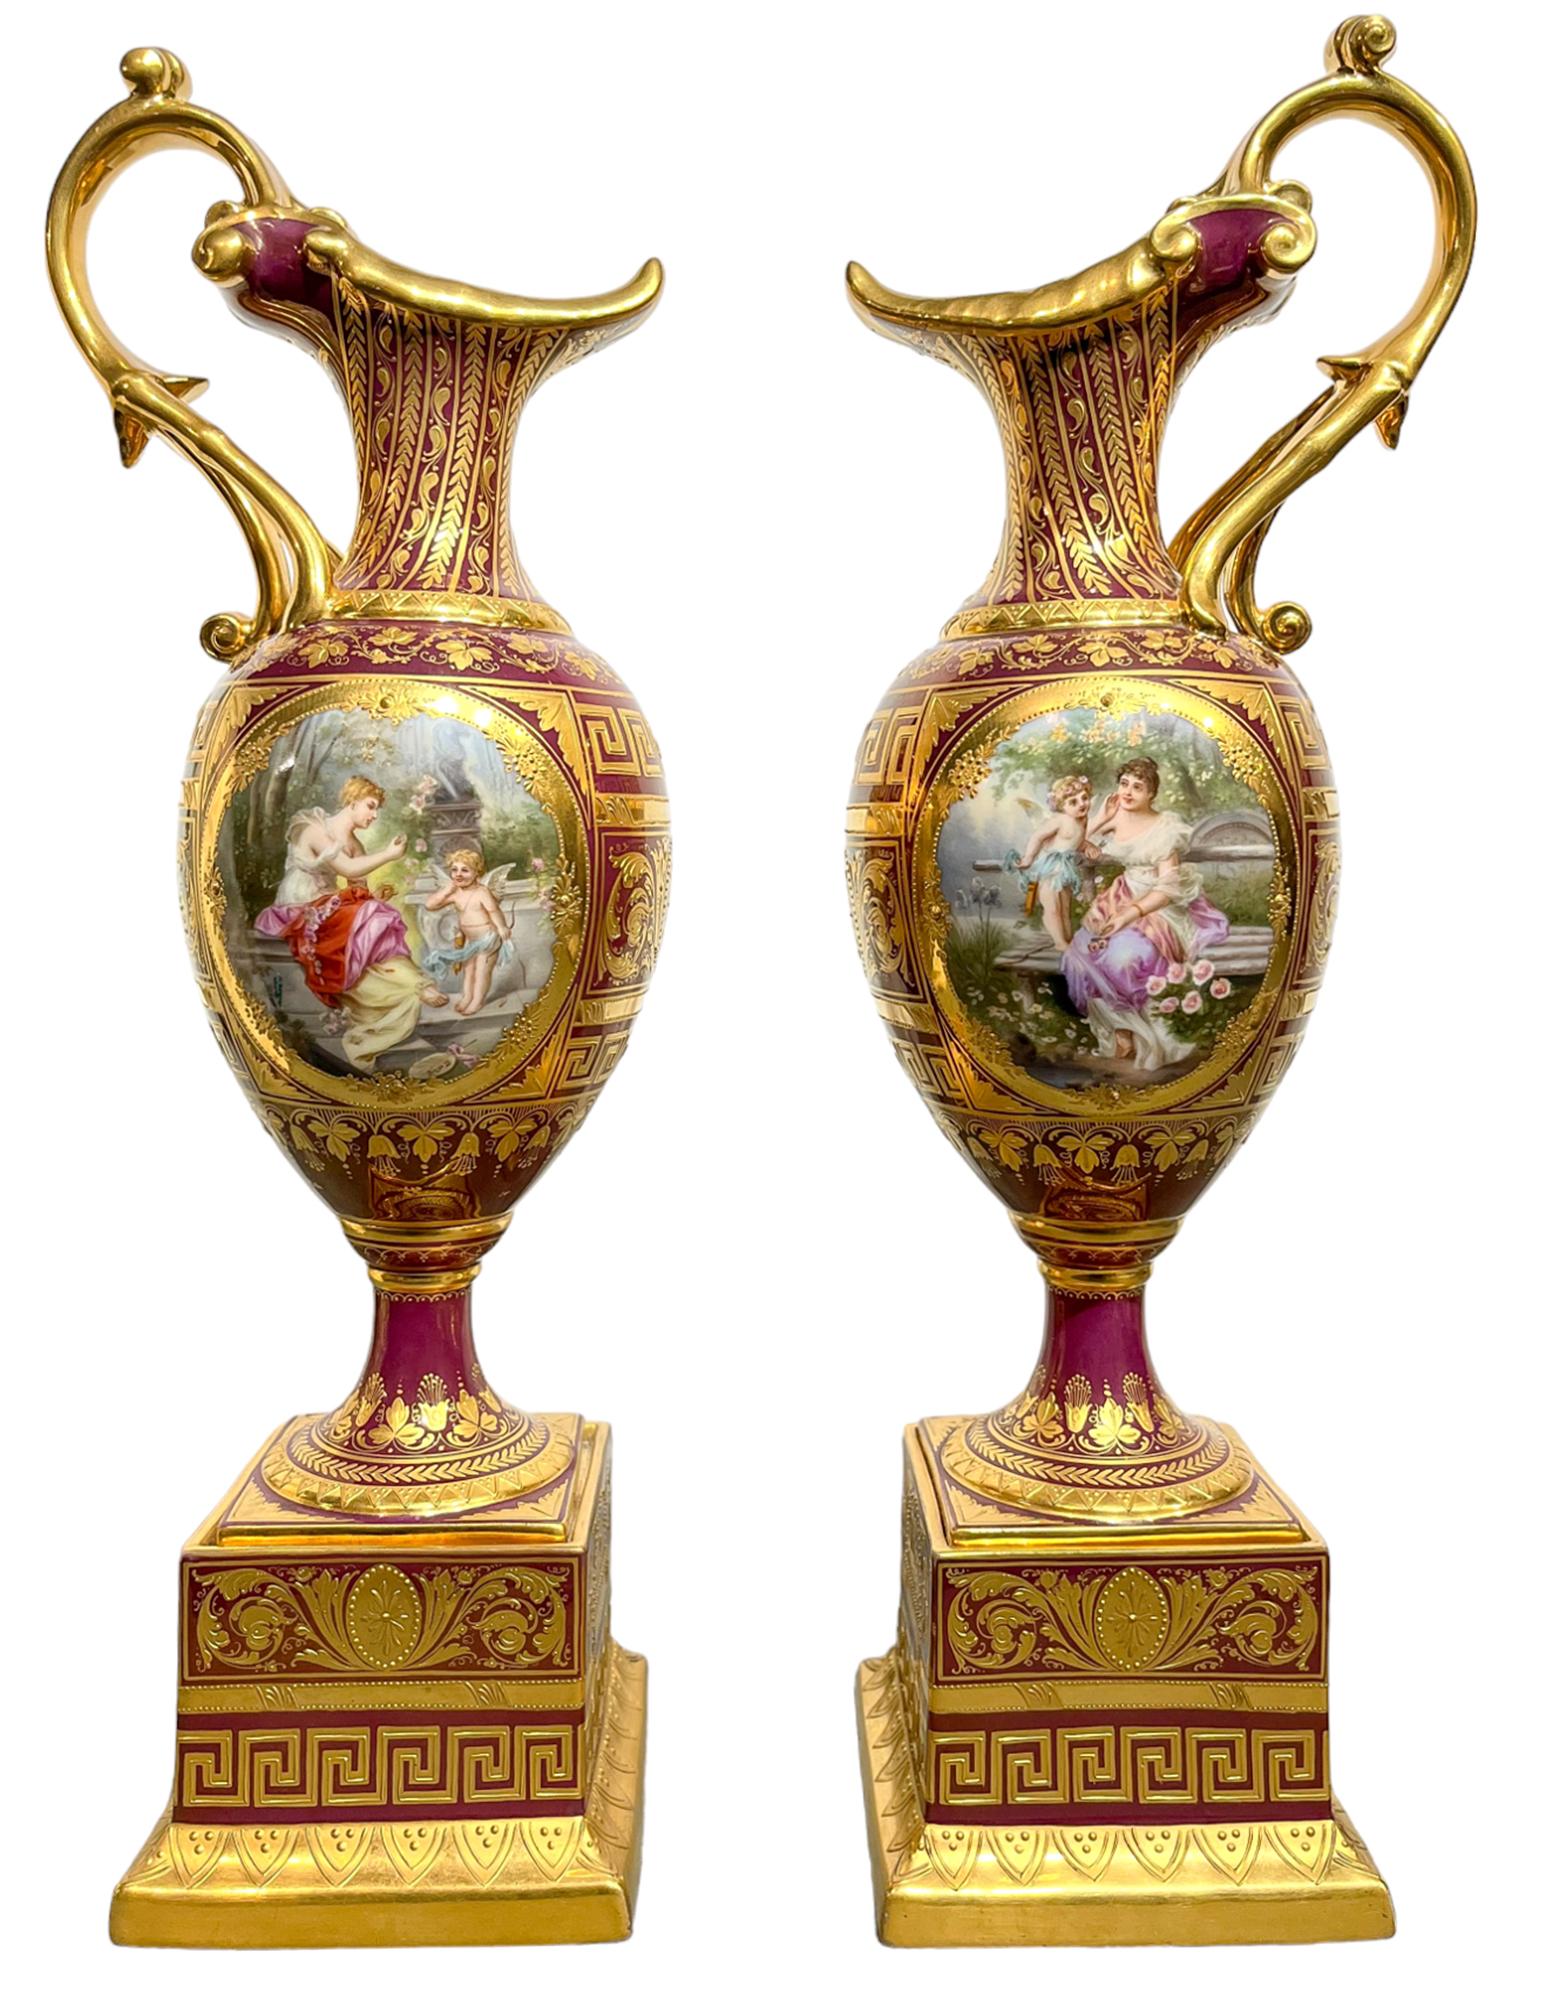 A Pair of Vienna Style Porcelain Iridescent Burgundy Ground Ewers on Stands 

Discover Stunning Late 19th/20th Century Austrian Porcelain Ewers: A Masterpiece by Wagner! These Vienna Style iridescent burgundy ewers, adorned with Pre-Raphaelite